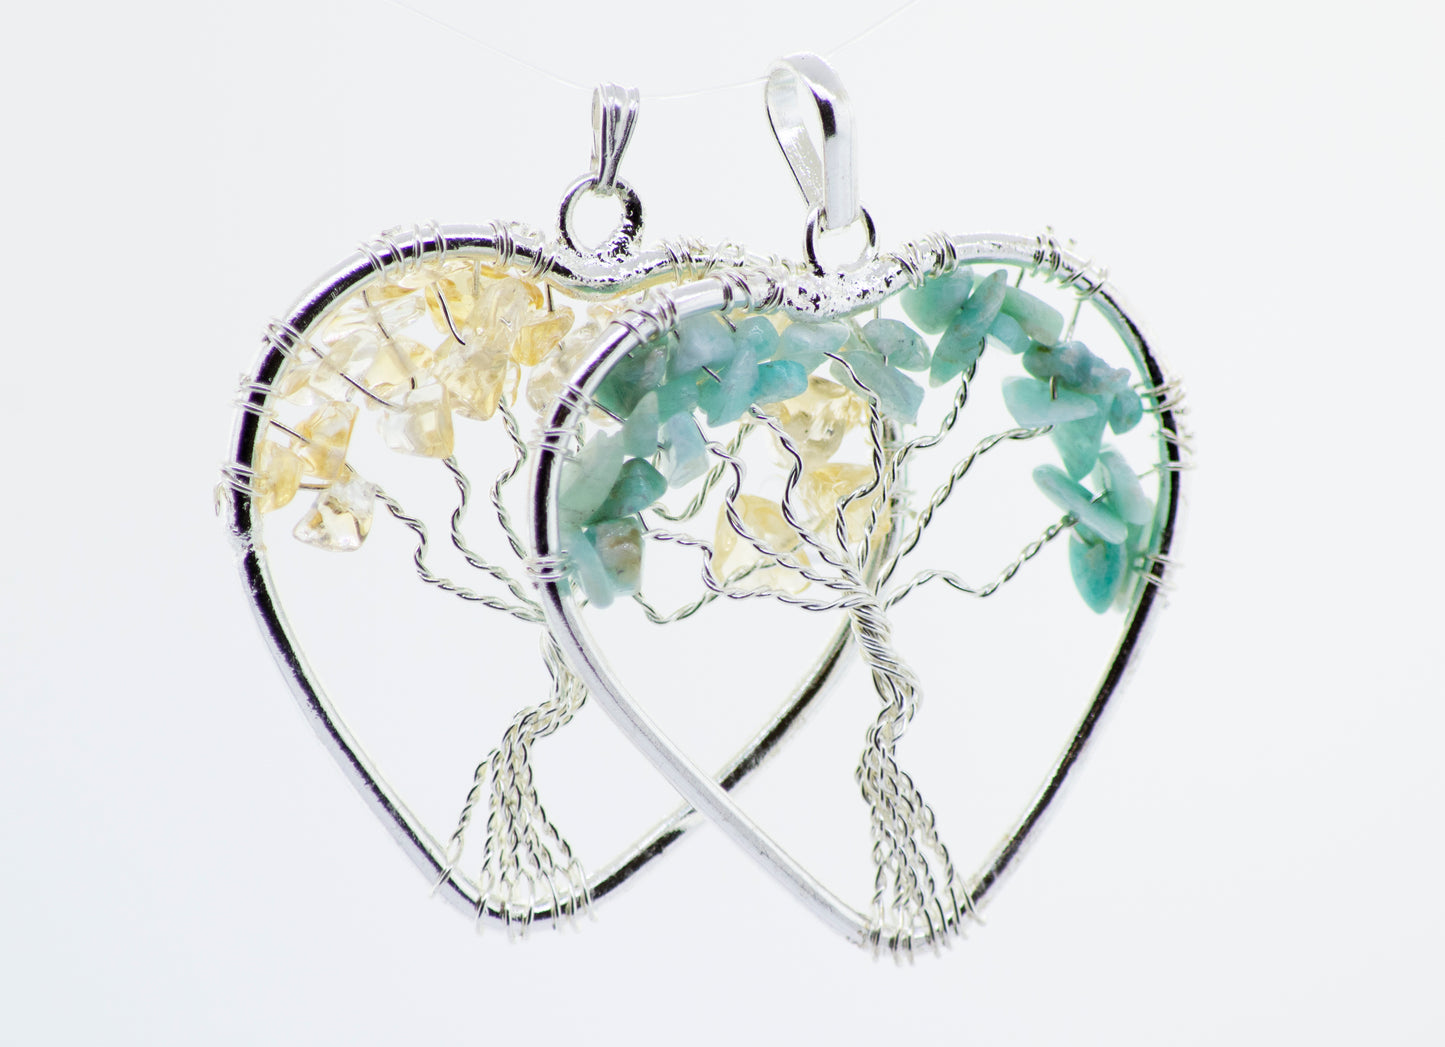 A Super Silver Heart Shaped Tree of Life Pendant featuring a beautiful tree of life design, forming a heart shape.